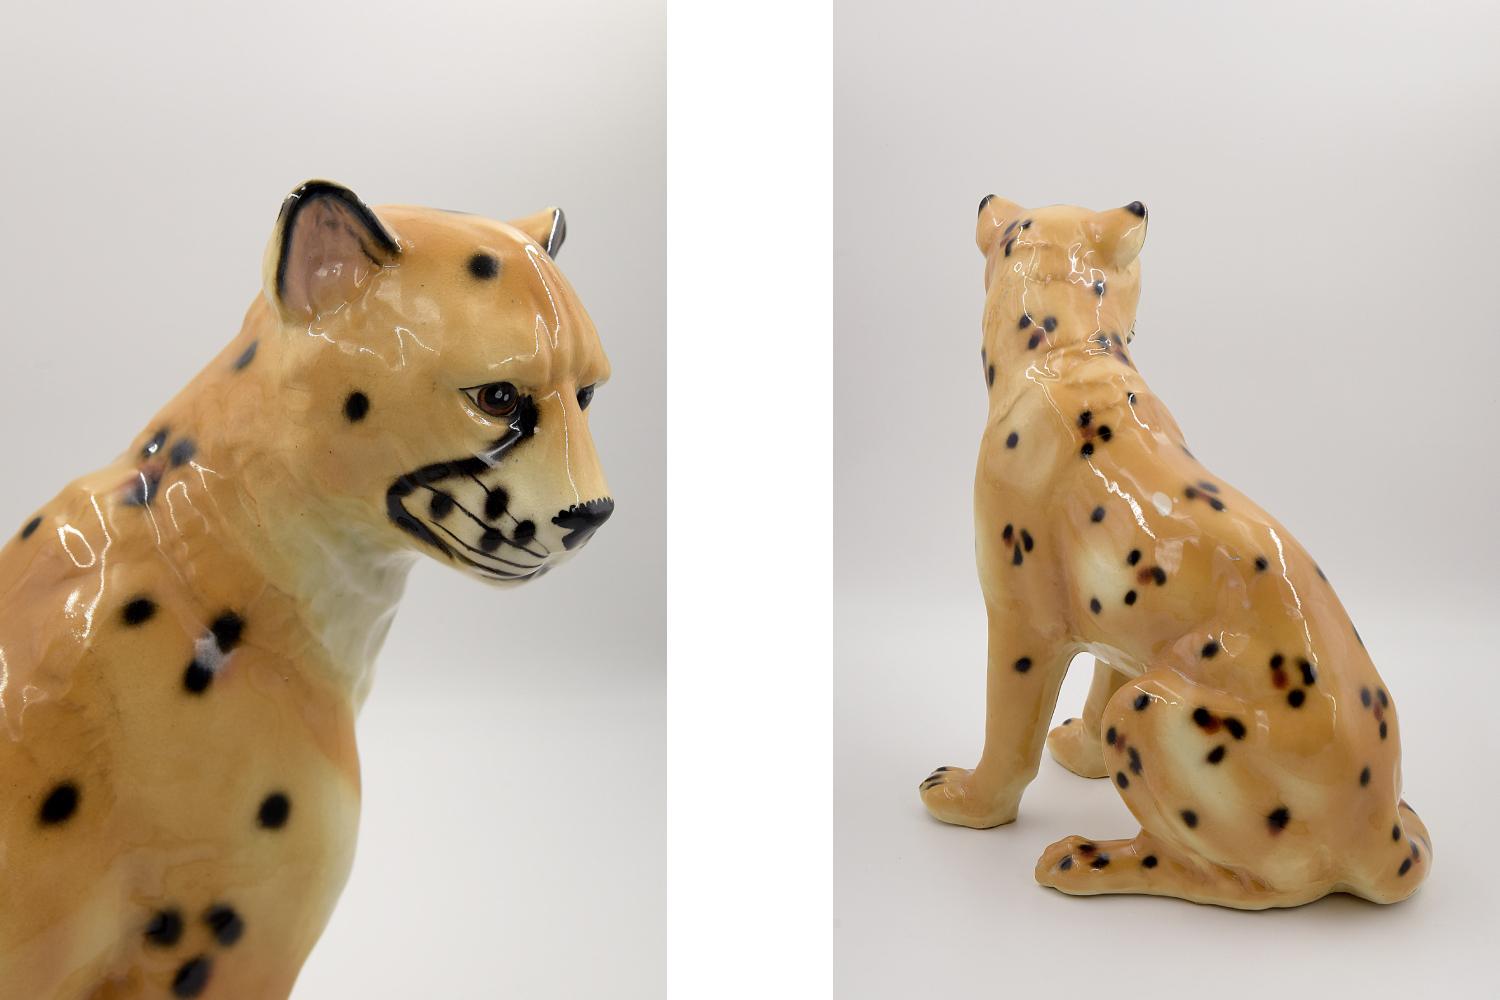 This large figure of a cheetah probably was produced in Italy during the 1970s. The figure is made of high-quality hand-painted ceramics in intense shades of orange. The cheetah is perfect for the office or living room, and as a complement to the